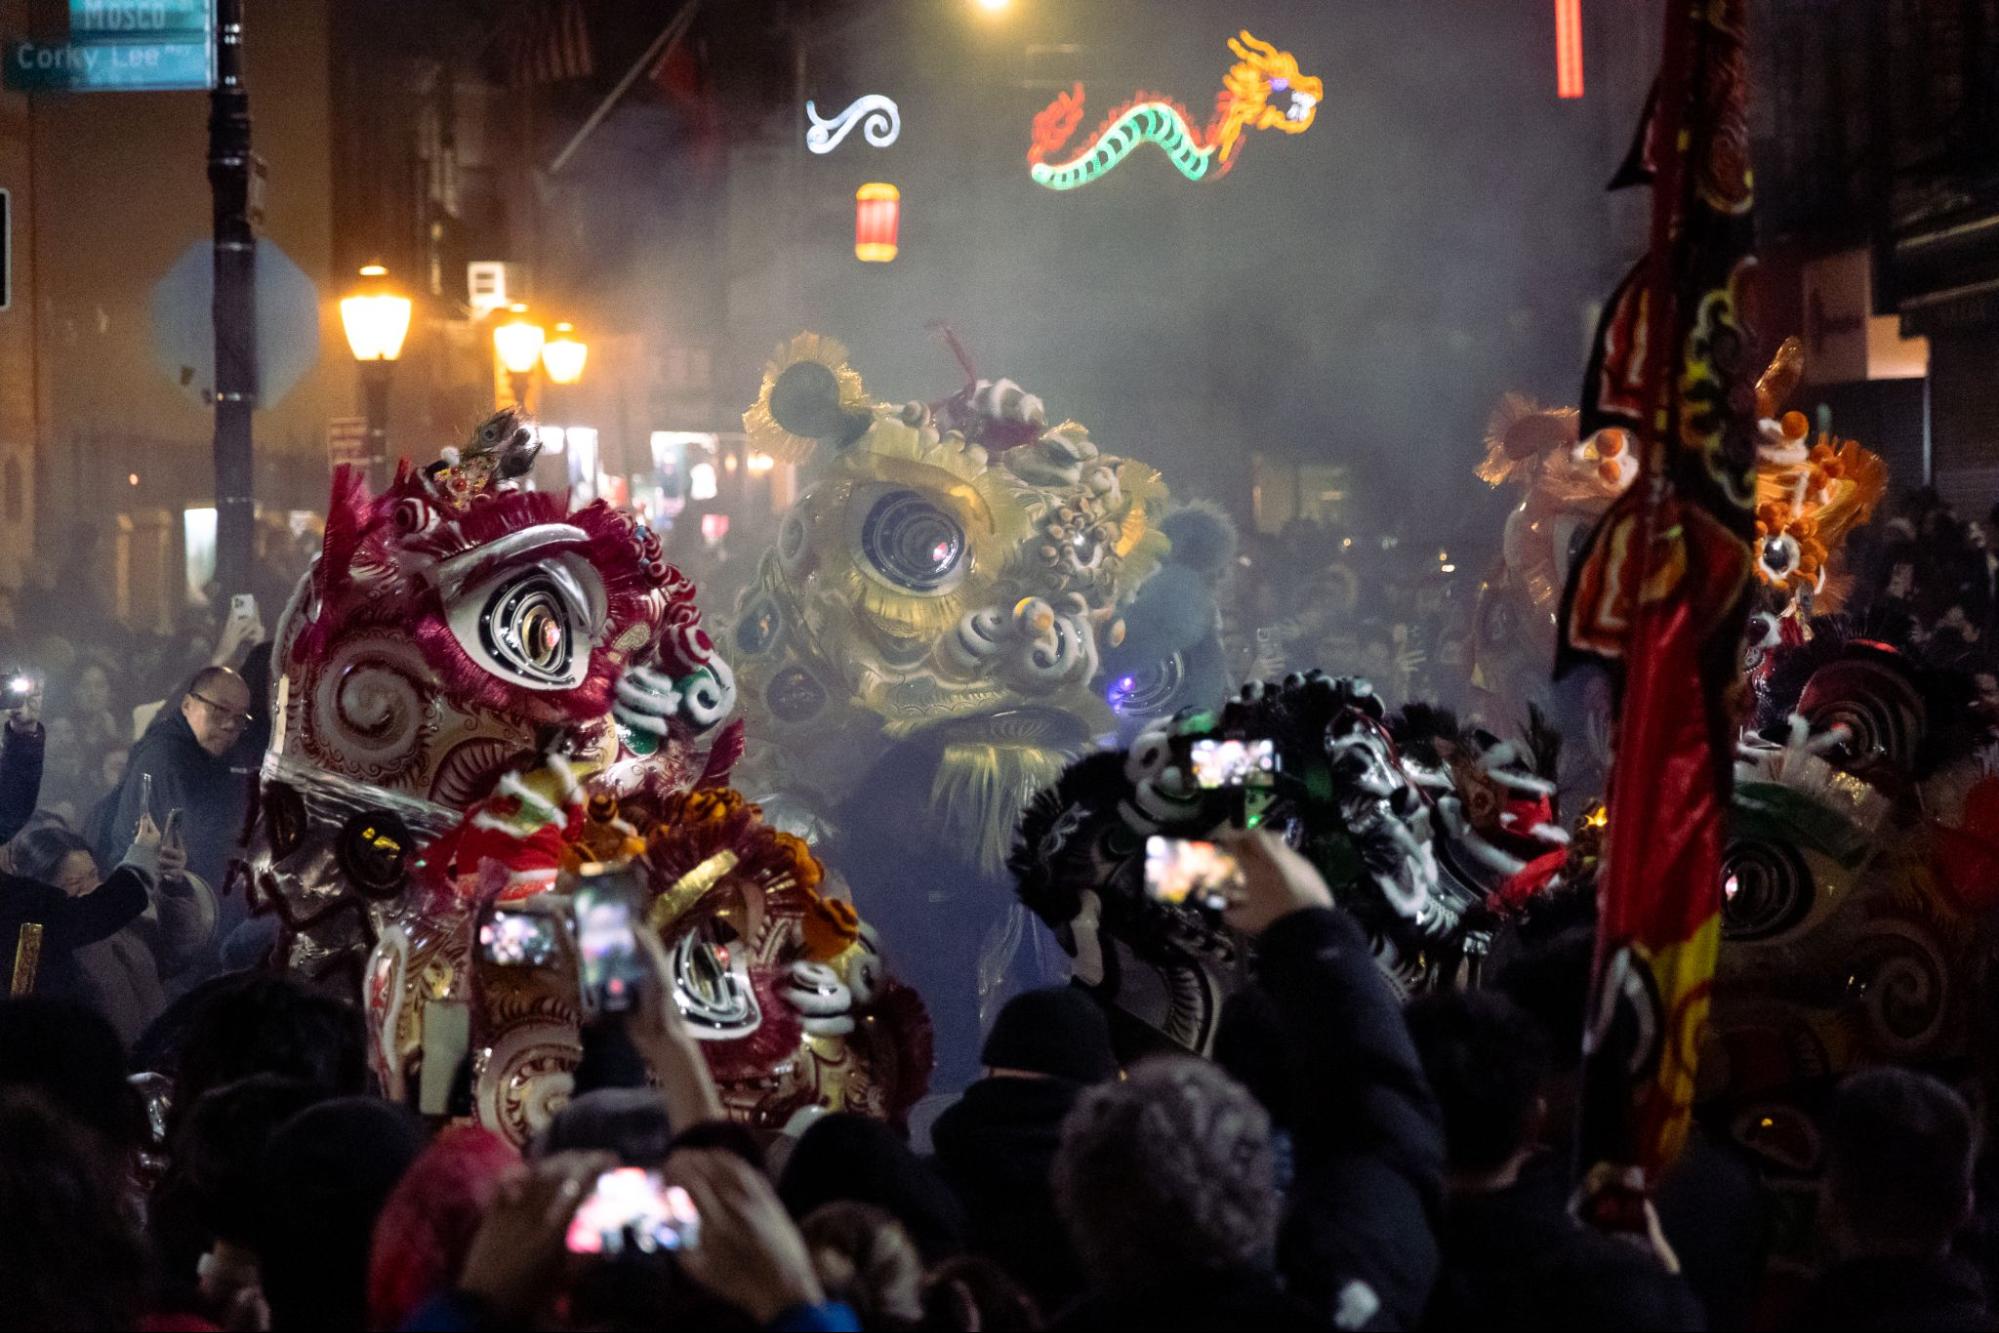 A number of lions dancing in a circle in the middle of a street amidst smoke and a crowd of audience.